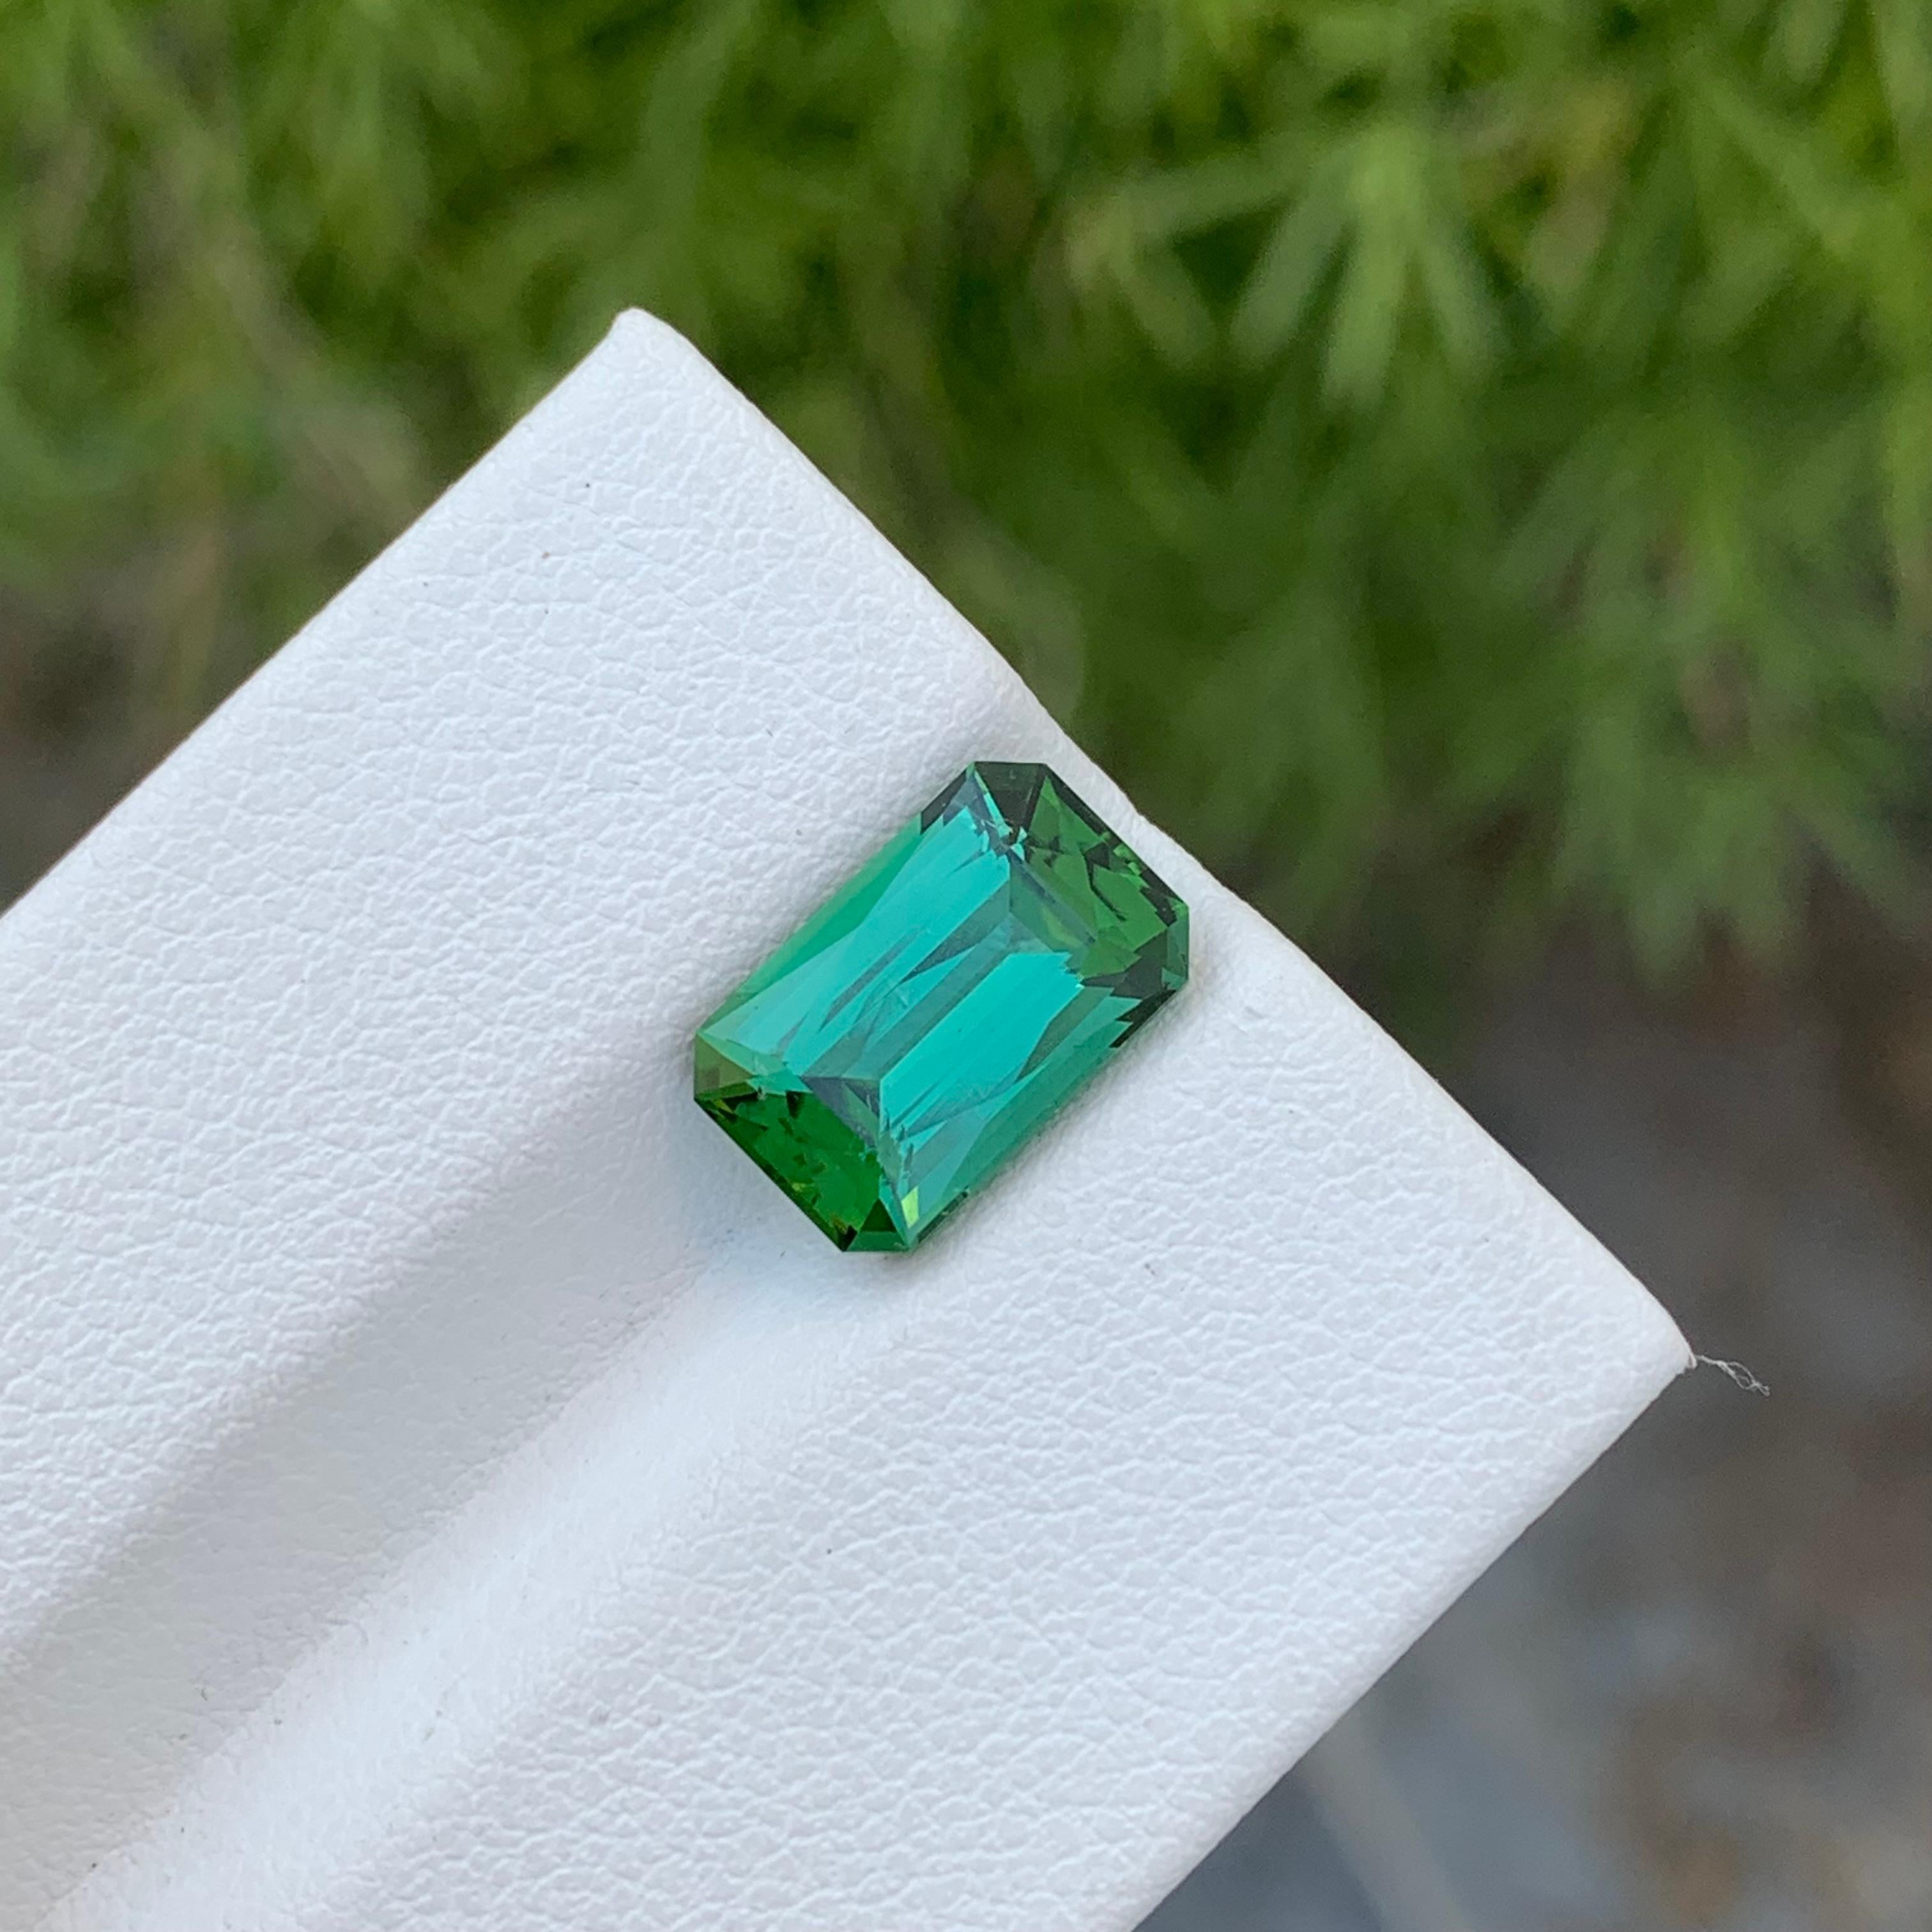 Loose Green Lagoon Tourmaline

Weight: 3.55 Carats
Dimension: 11 x 7 x 5.4 Mm
Colour: Green Lagoon
Origin: Afghanistan
Certificate: On Demand
Treatment: Non

Tourmaline is a captivating gemstone known for its remarkable variety of colors, making it